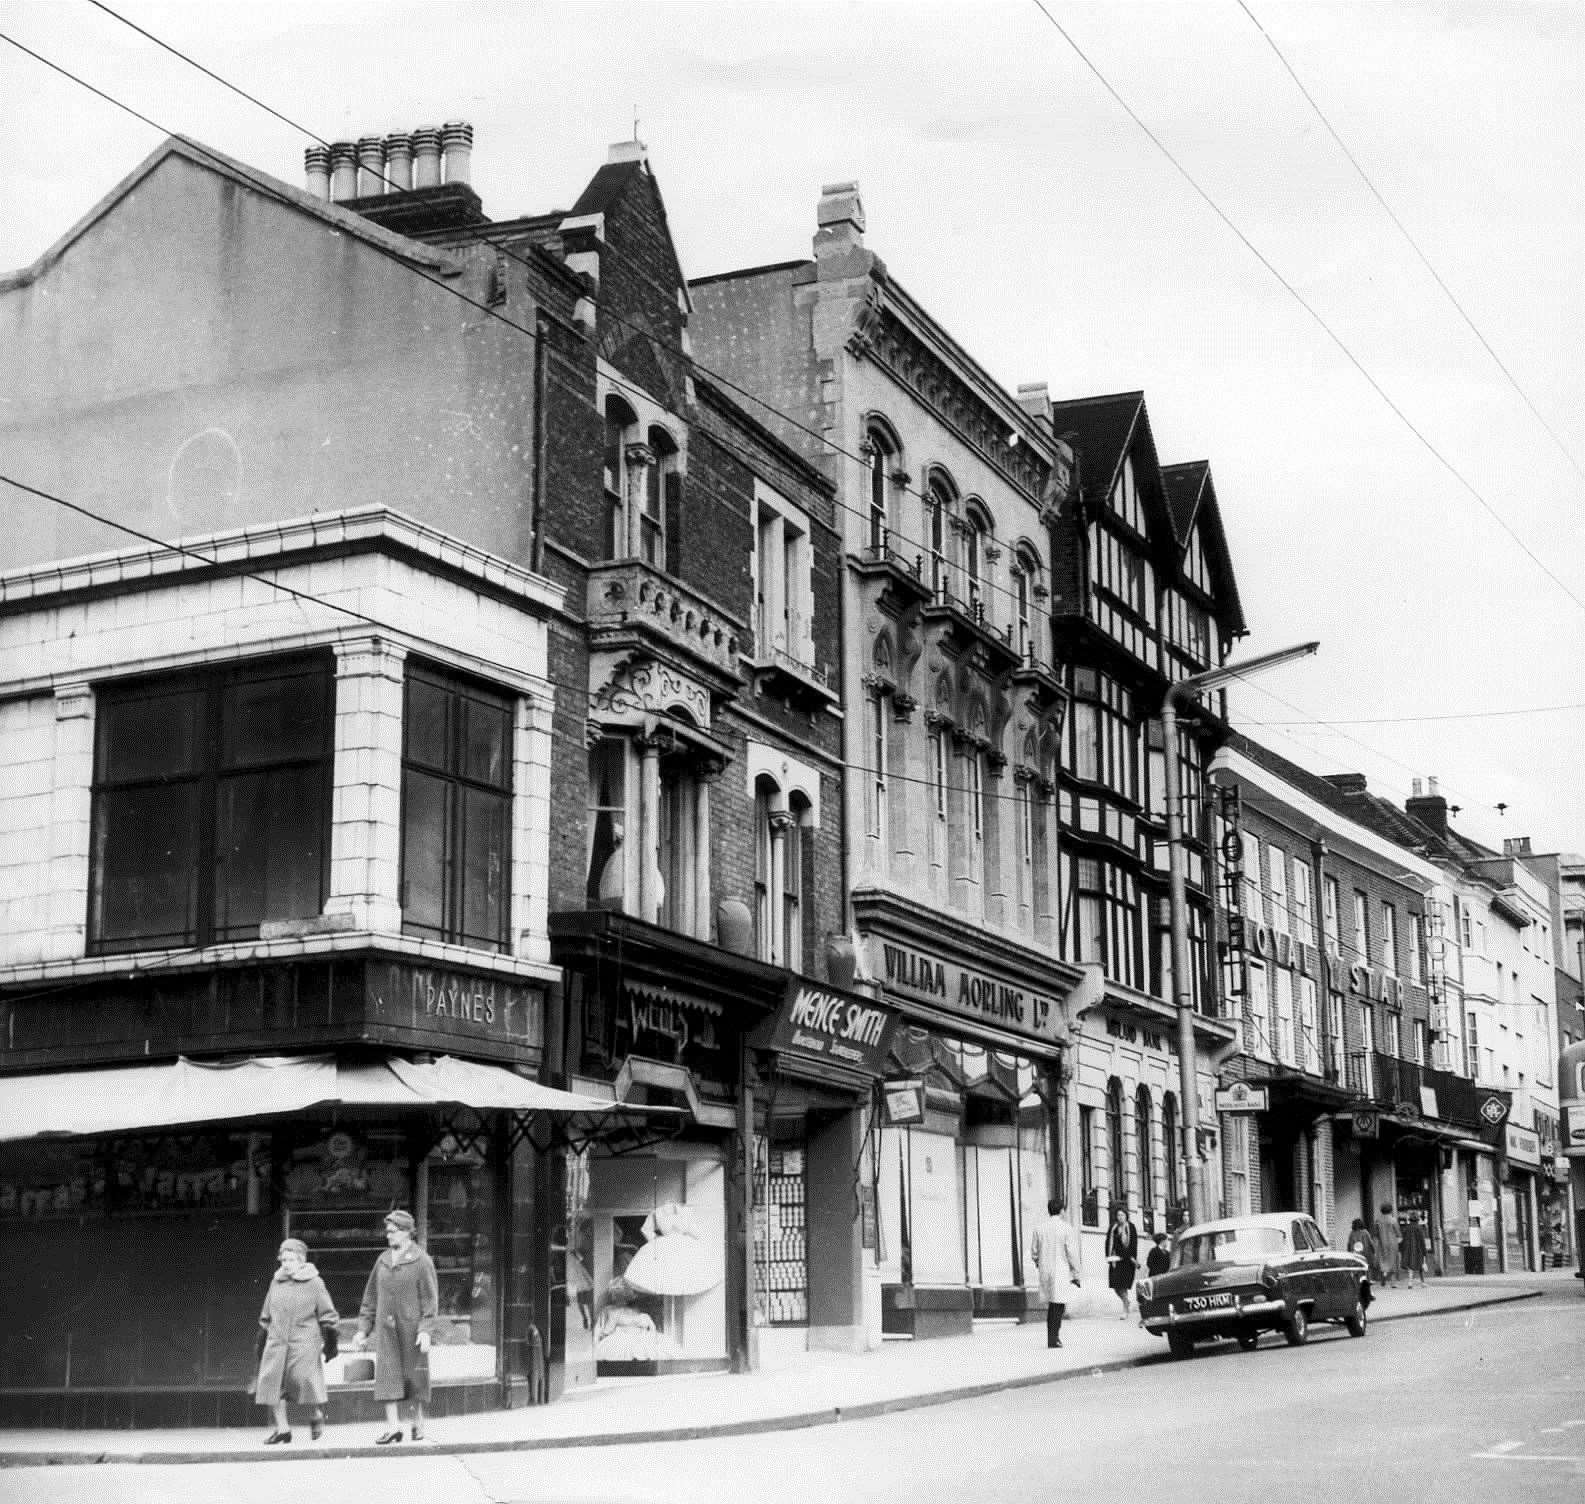 The Royal Star Hotel, Maidstone, pictured in March 1961. It was converted into the shop-lined Royal Star Arcade in 1986